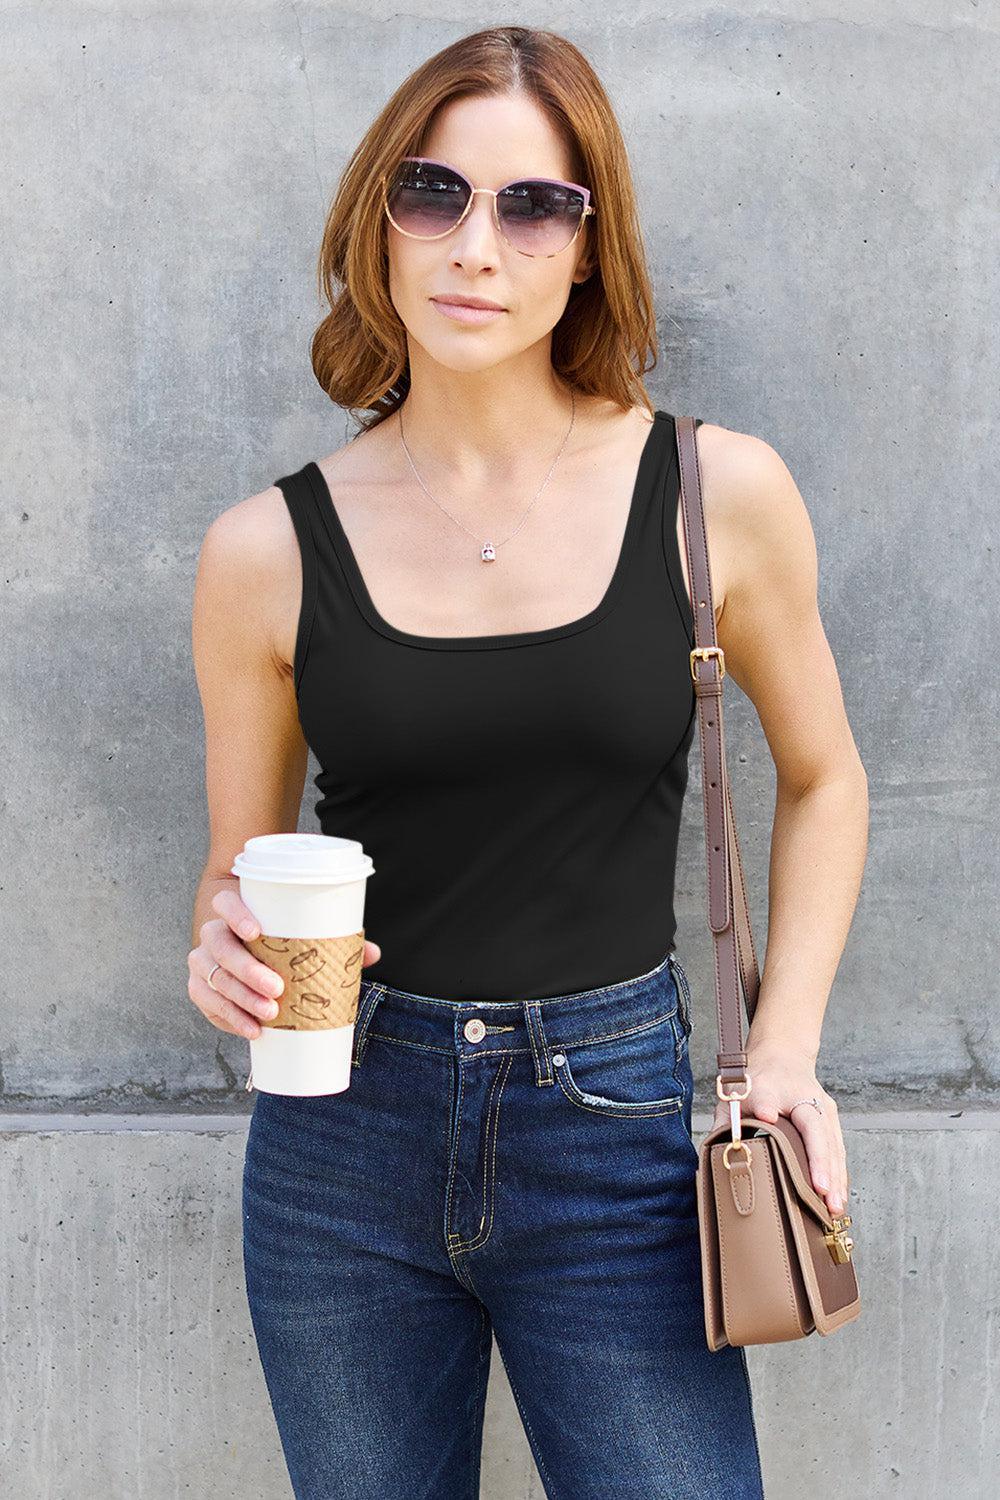 a woman holding a cup of coffee and wearing sunglasses